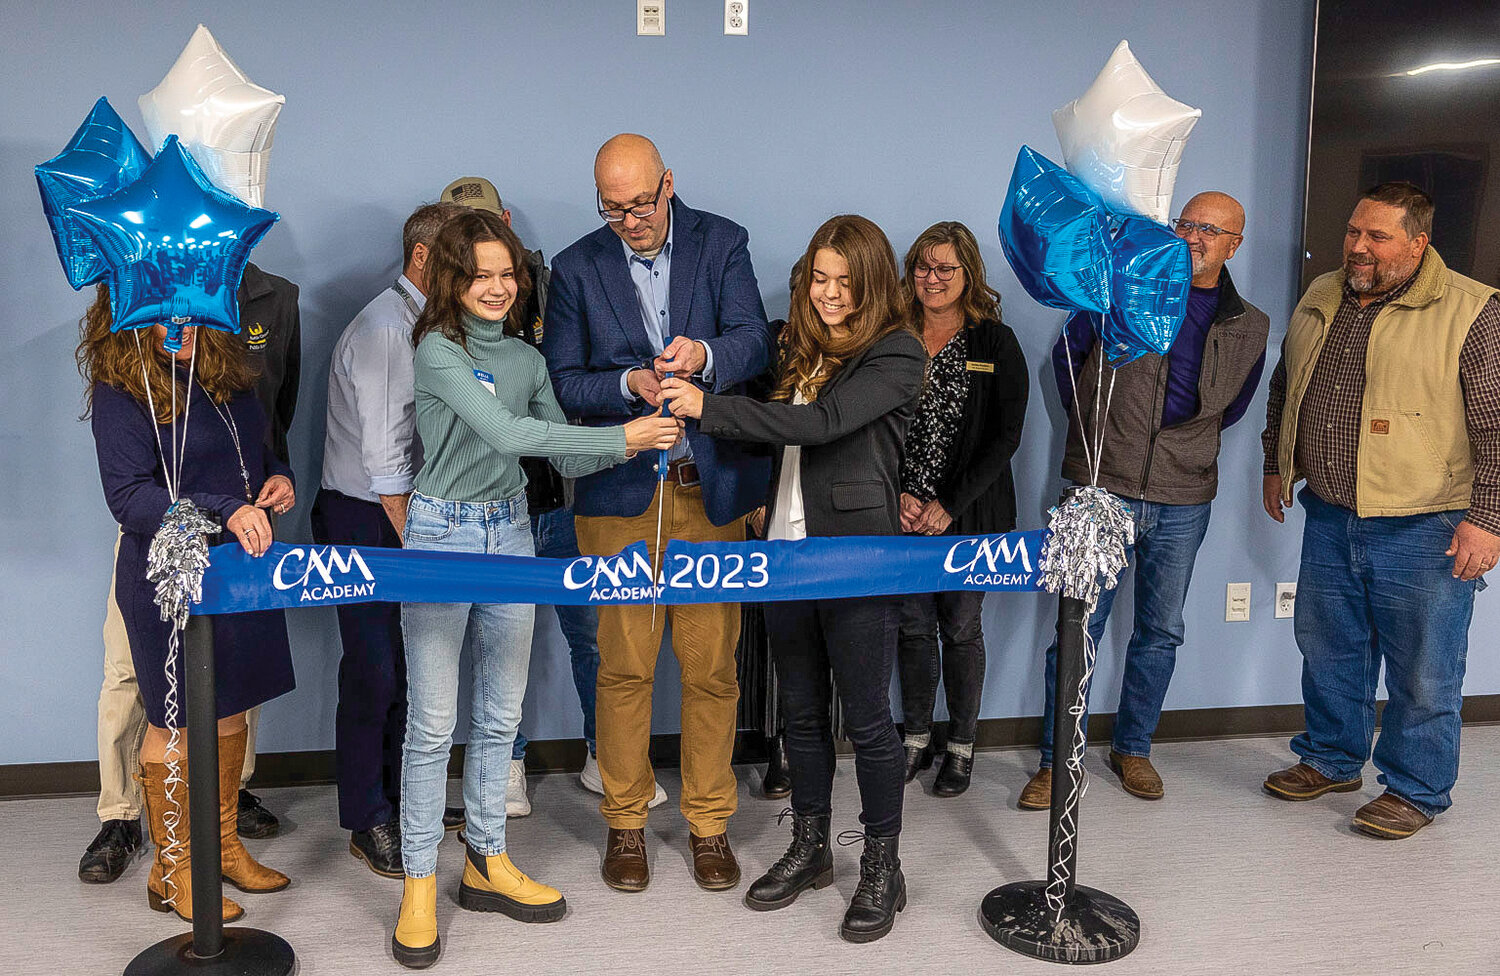 CAM Academy eighth grader Anastasia Royenko, left, and 11th grader Elsa Bice, right, cut the ribbon with Principal Ryan Cowl during the dedication ceremony on Monday, Nov. 27.